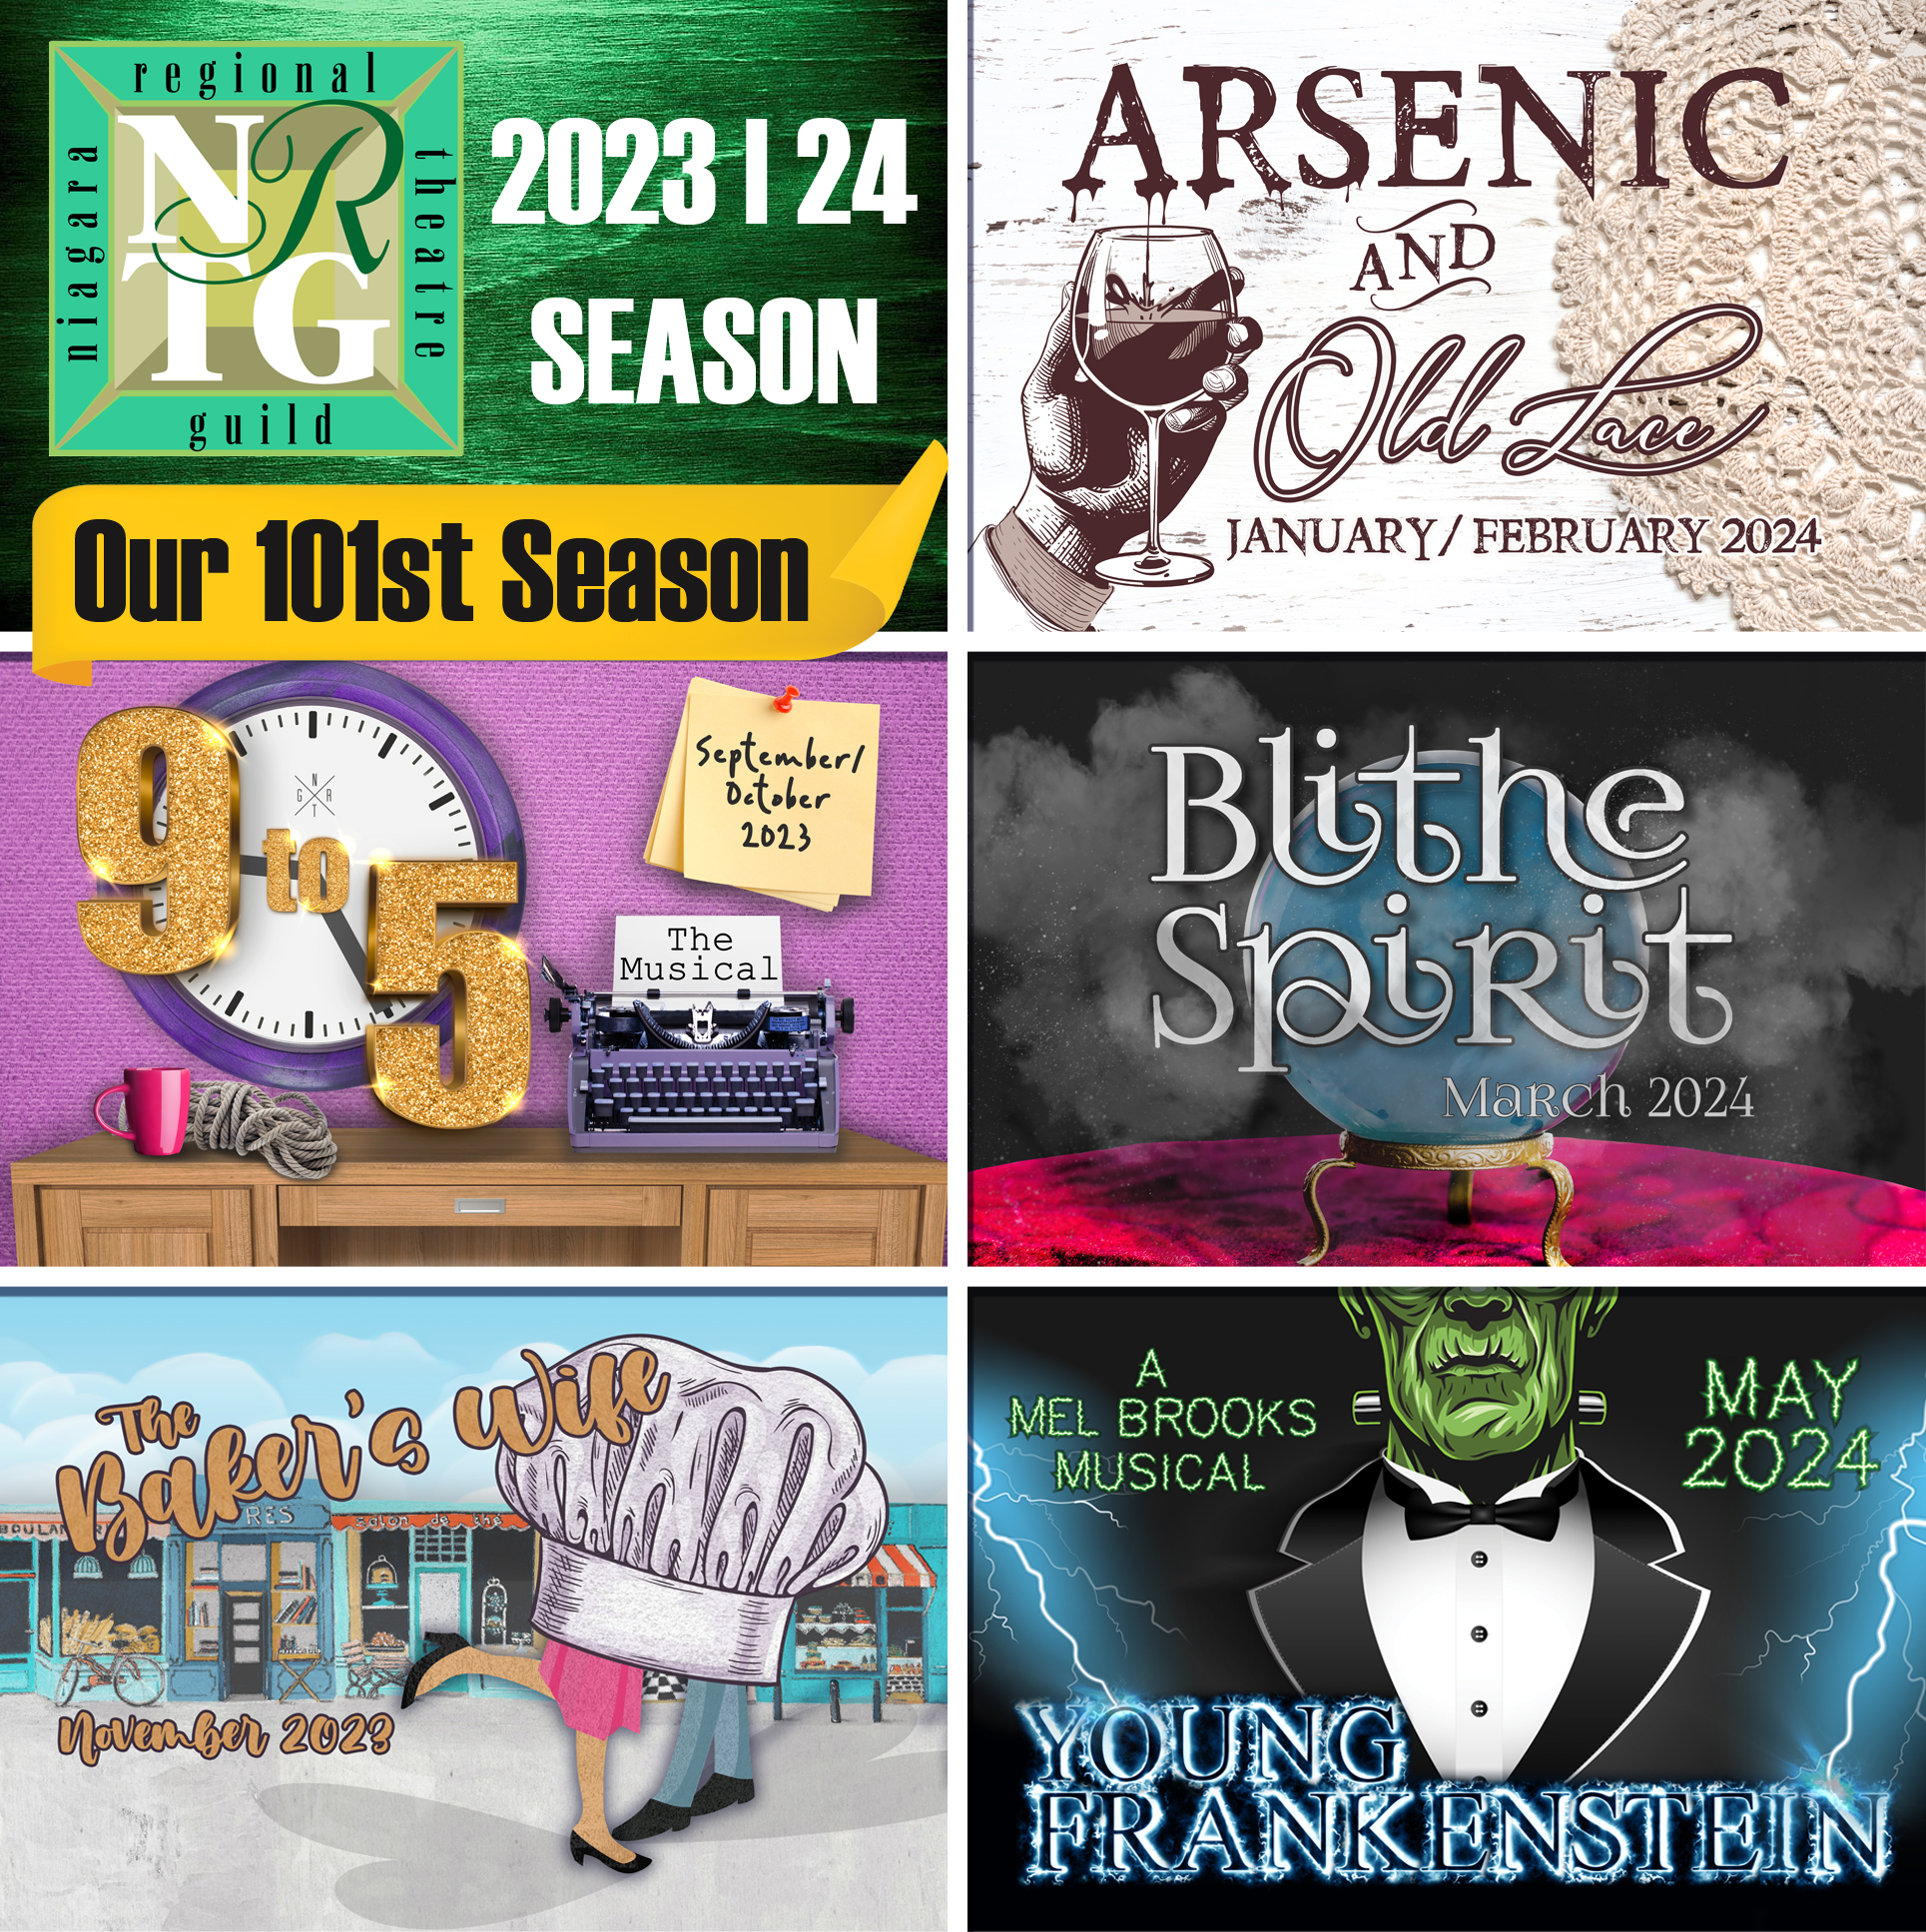 2023-24 Season: 9 to 5 (September/October 2023), The Baker's Wife (November 2023), Arsenic and Old Lace (January/February 2024), Blithe Spirit (March 2024), Young Frankenstein (May 2024)